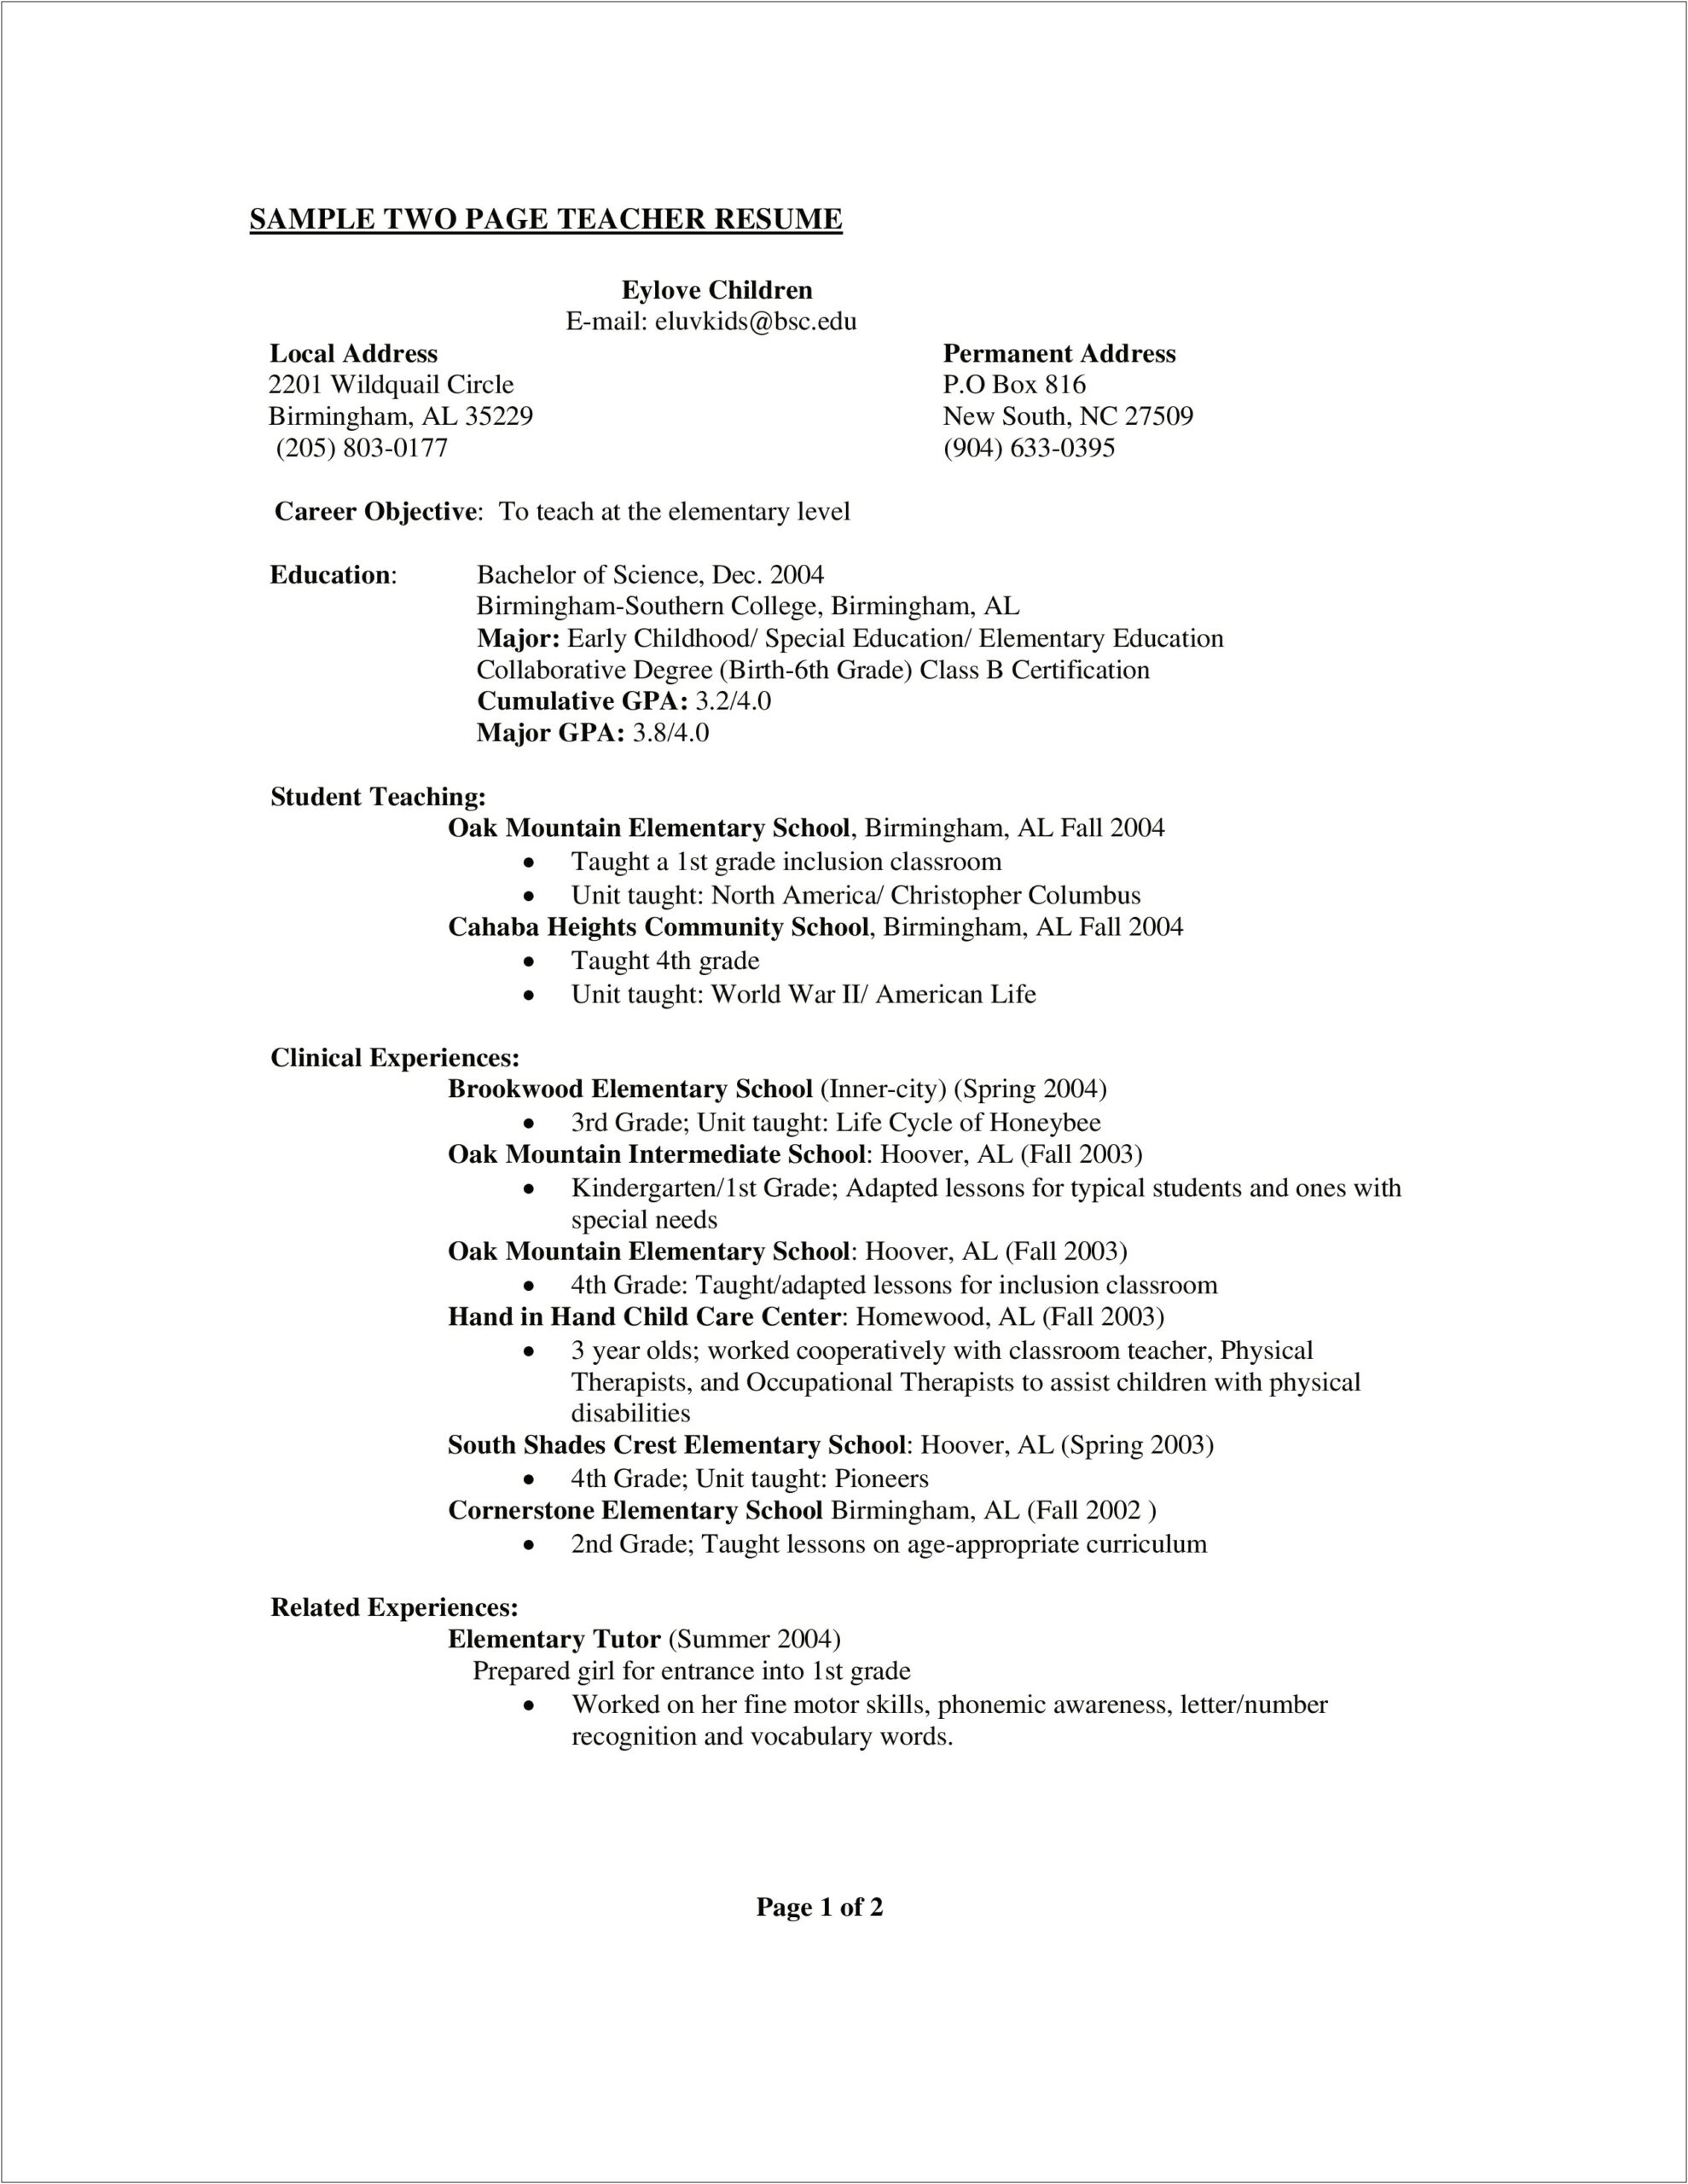 Sample Resume With Two Pages